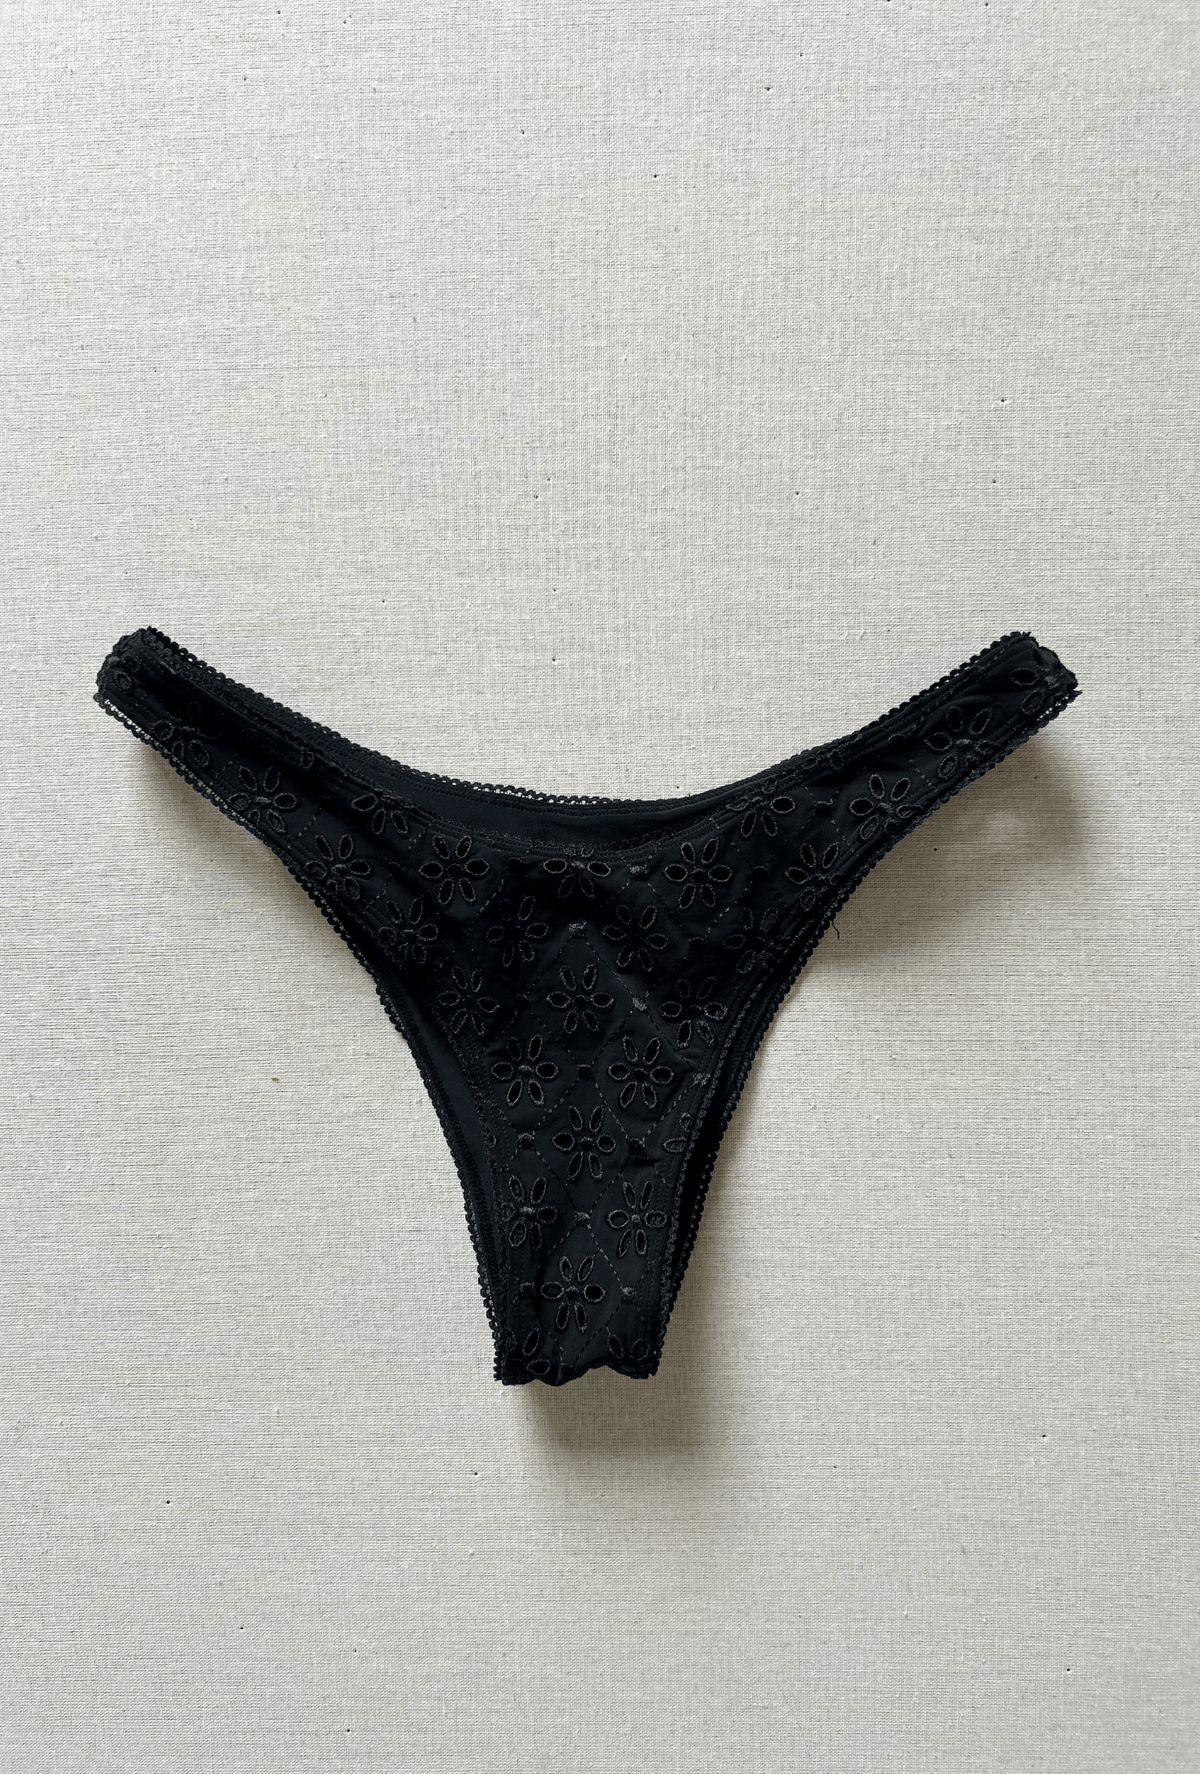 bee bottom with lace trim in black eyelet - size small